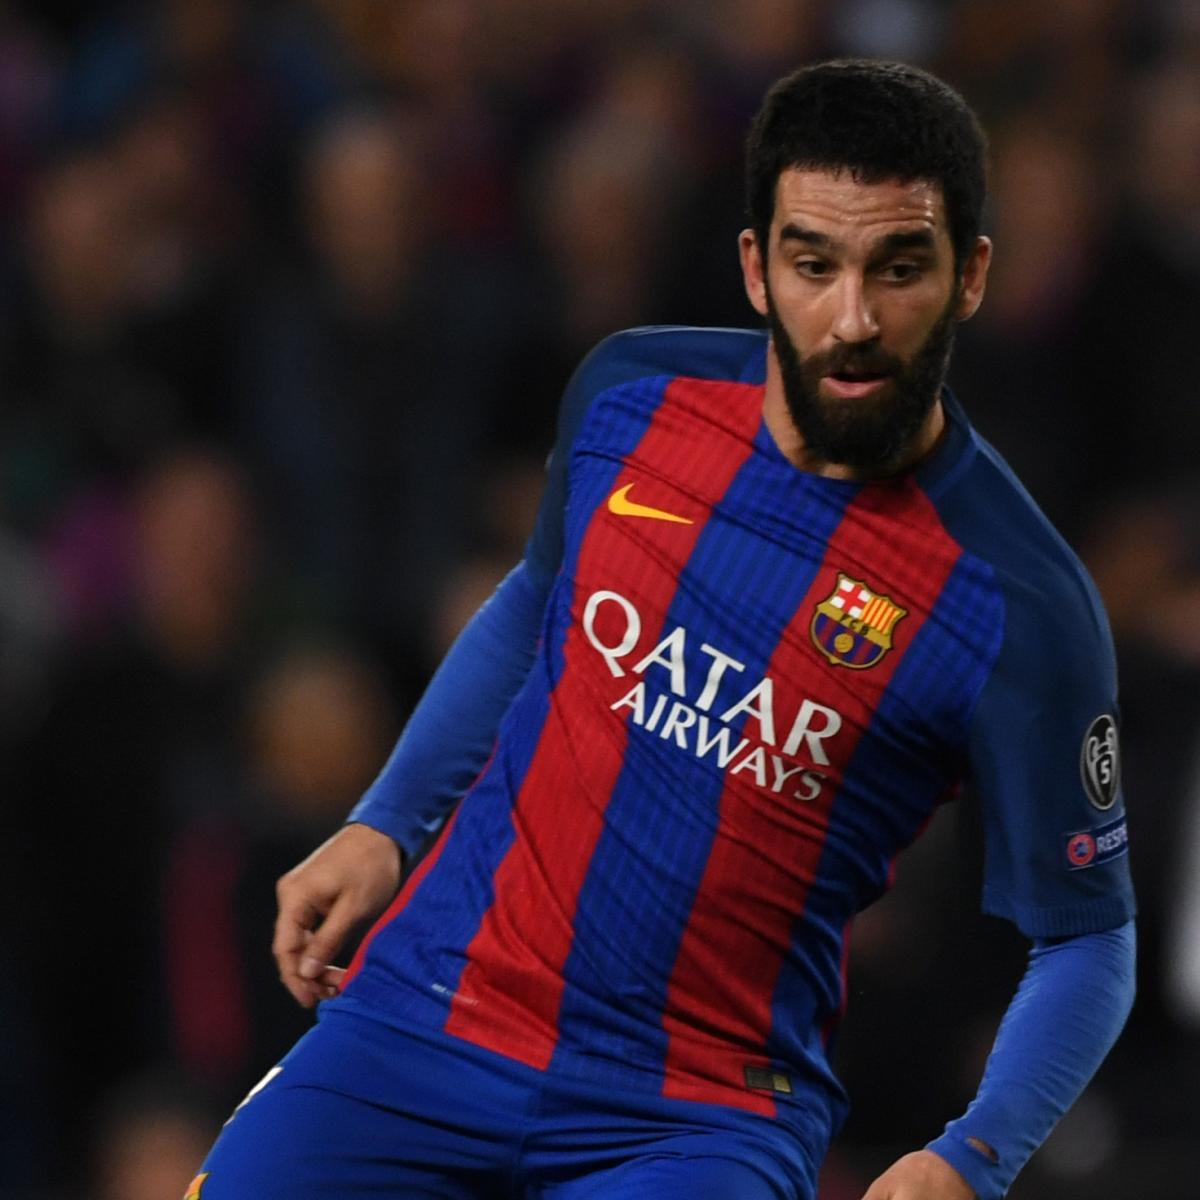 Barcelona Transfer News: Andre Gomes, Arda Turan Sales Reportedly Discussed - Bleacher Report